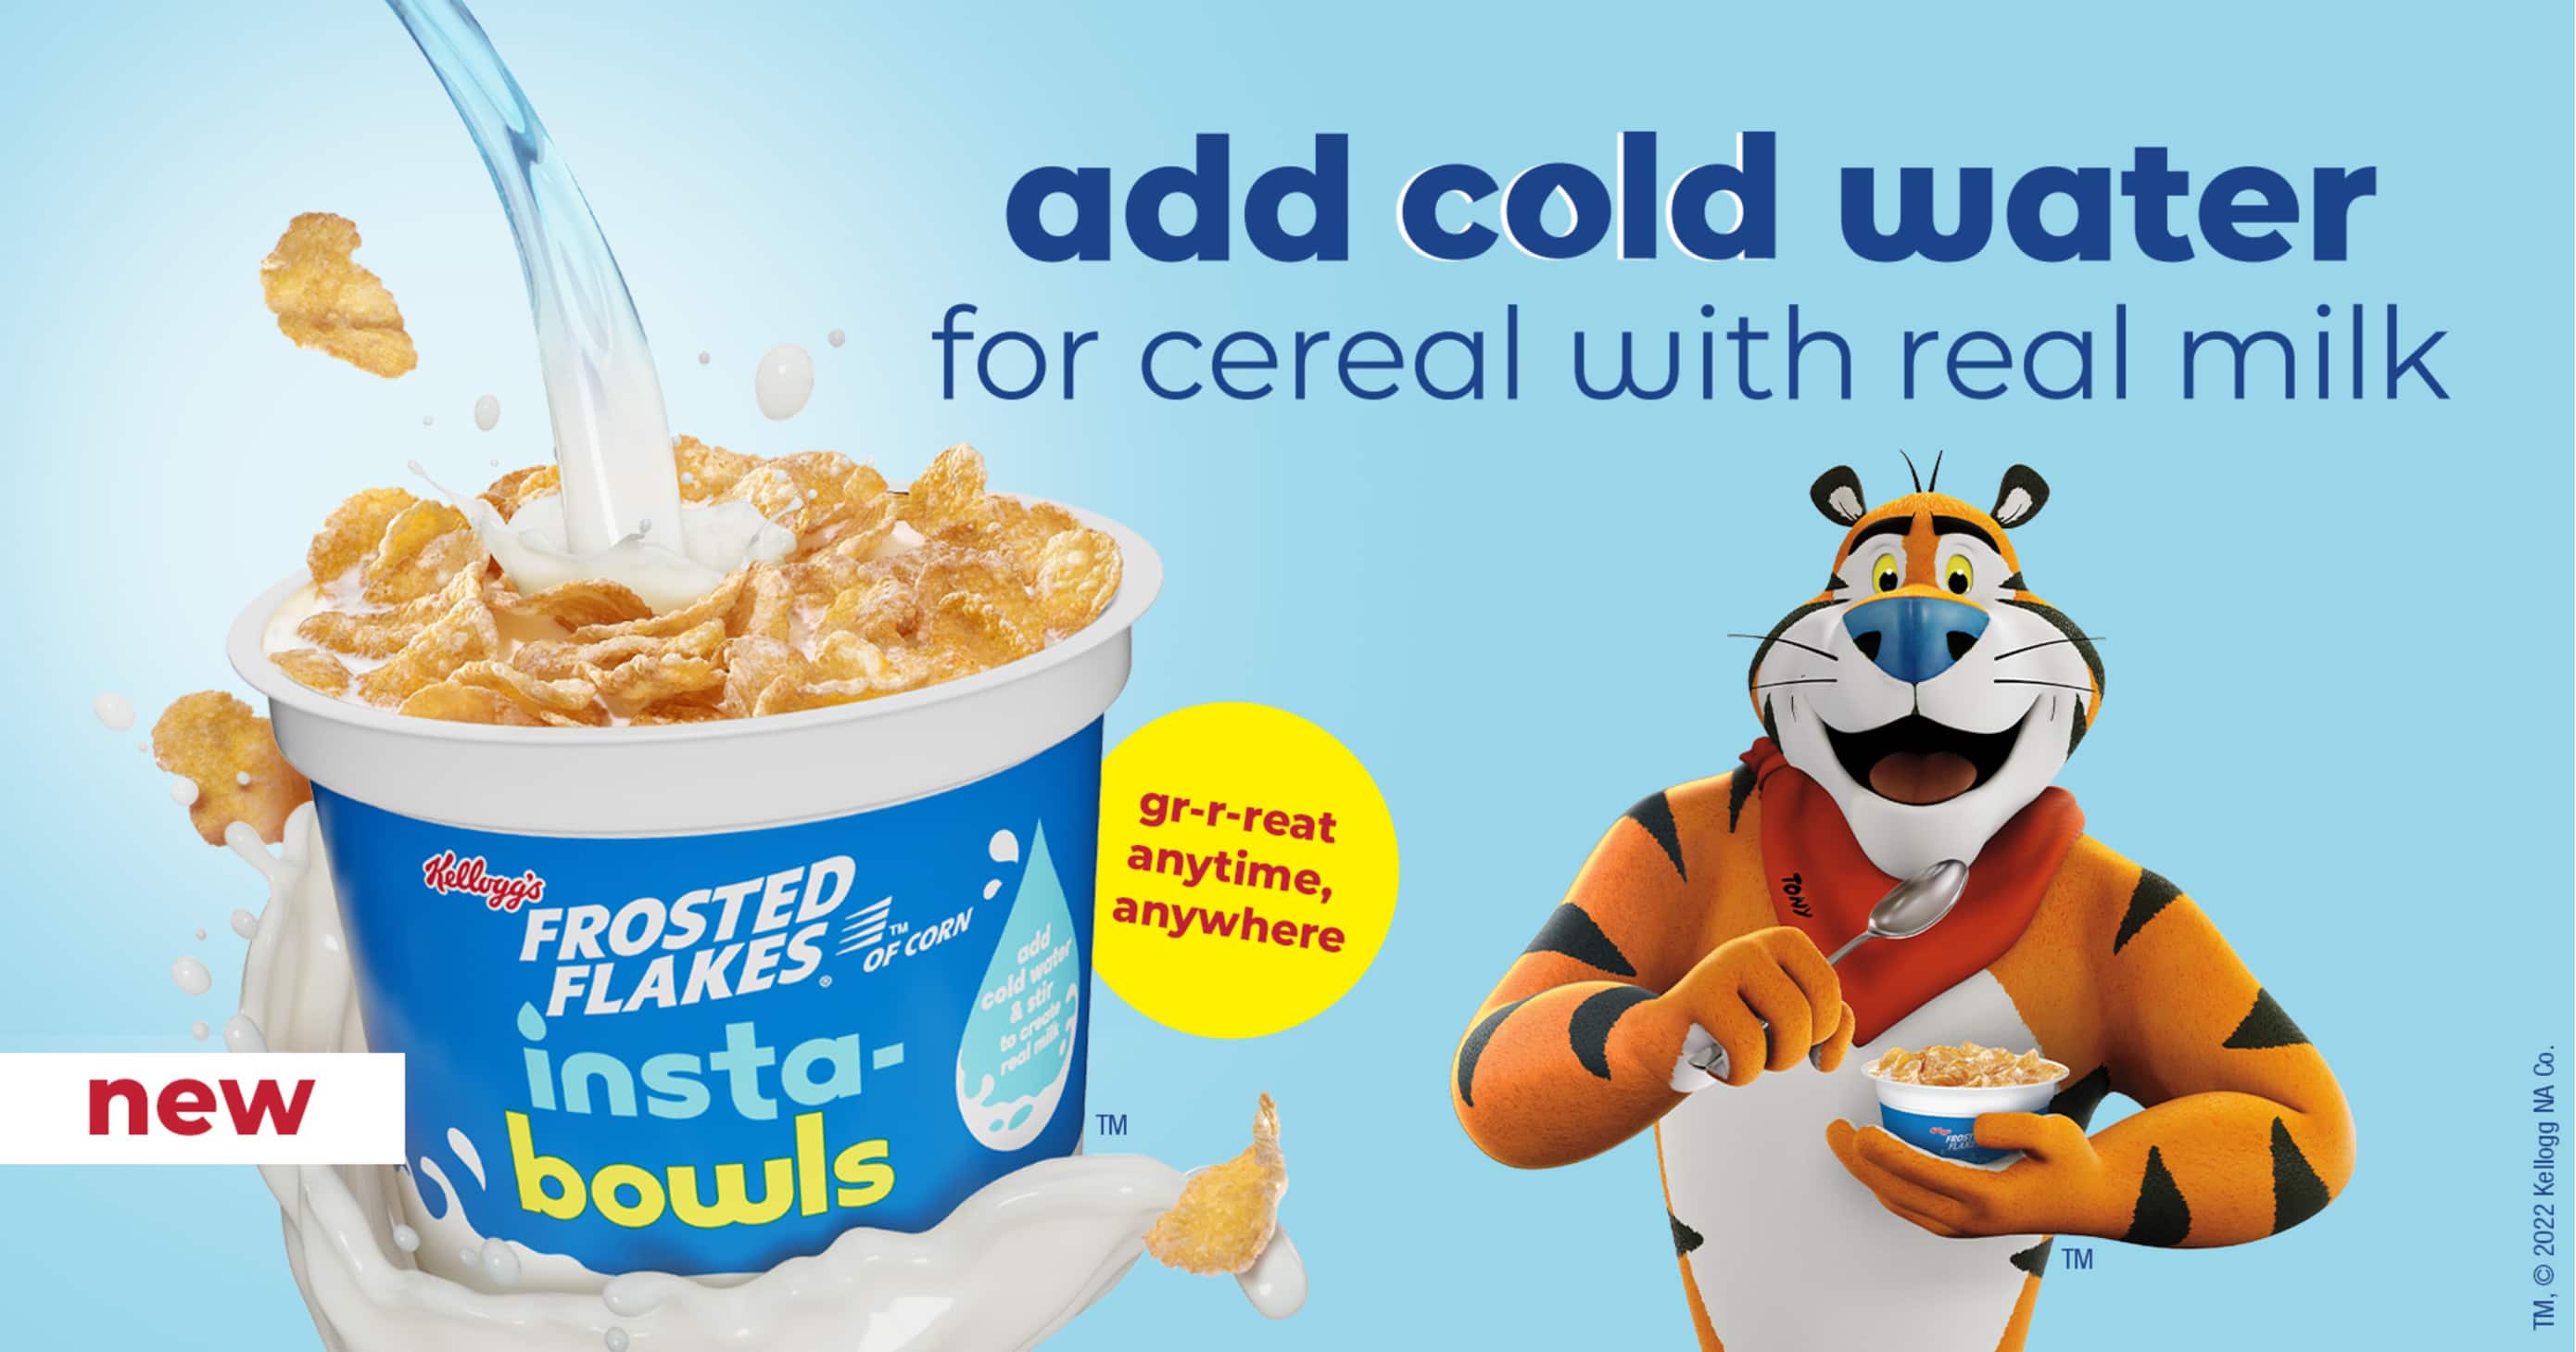 Where to Buy Kellogg's Just-Add-Water Cereal 'Instabowls